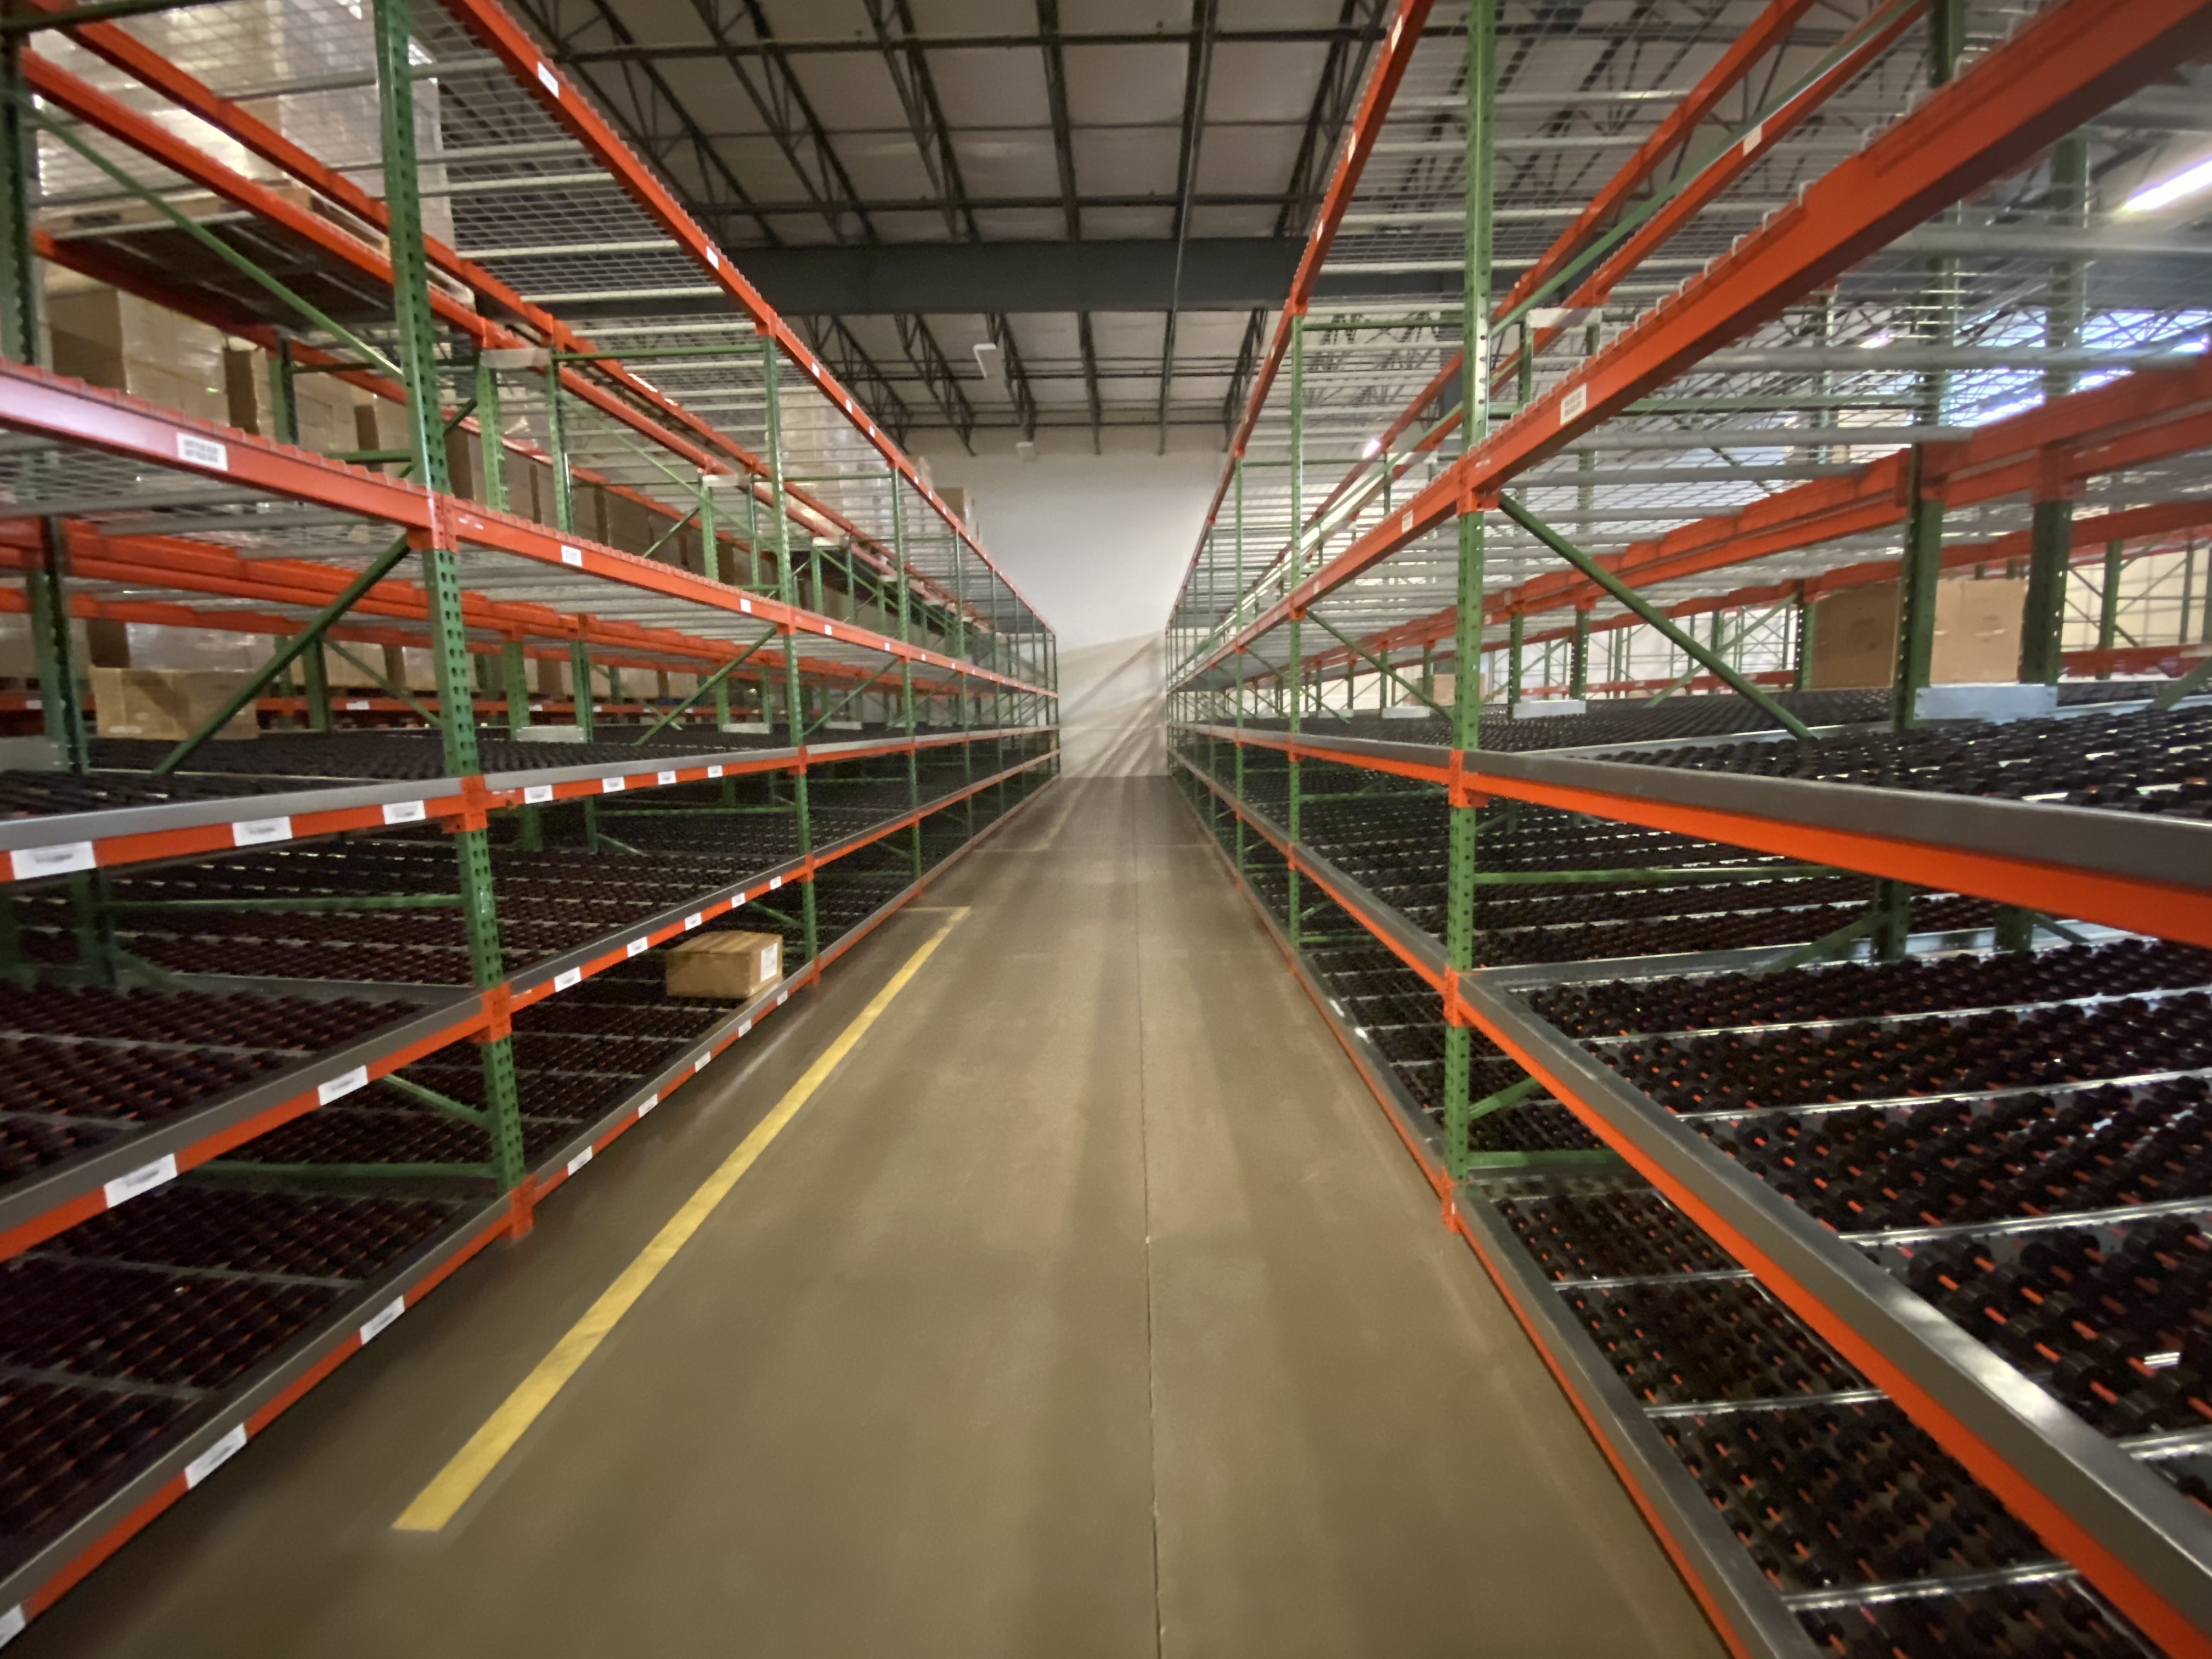 Looking down an aisle on a warehouse with green and orange carton flow racking on both side